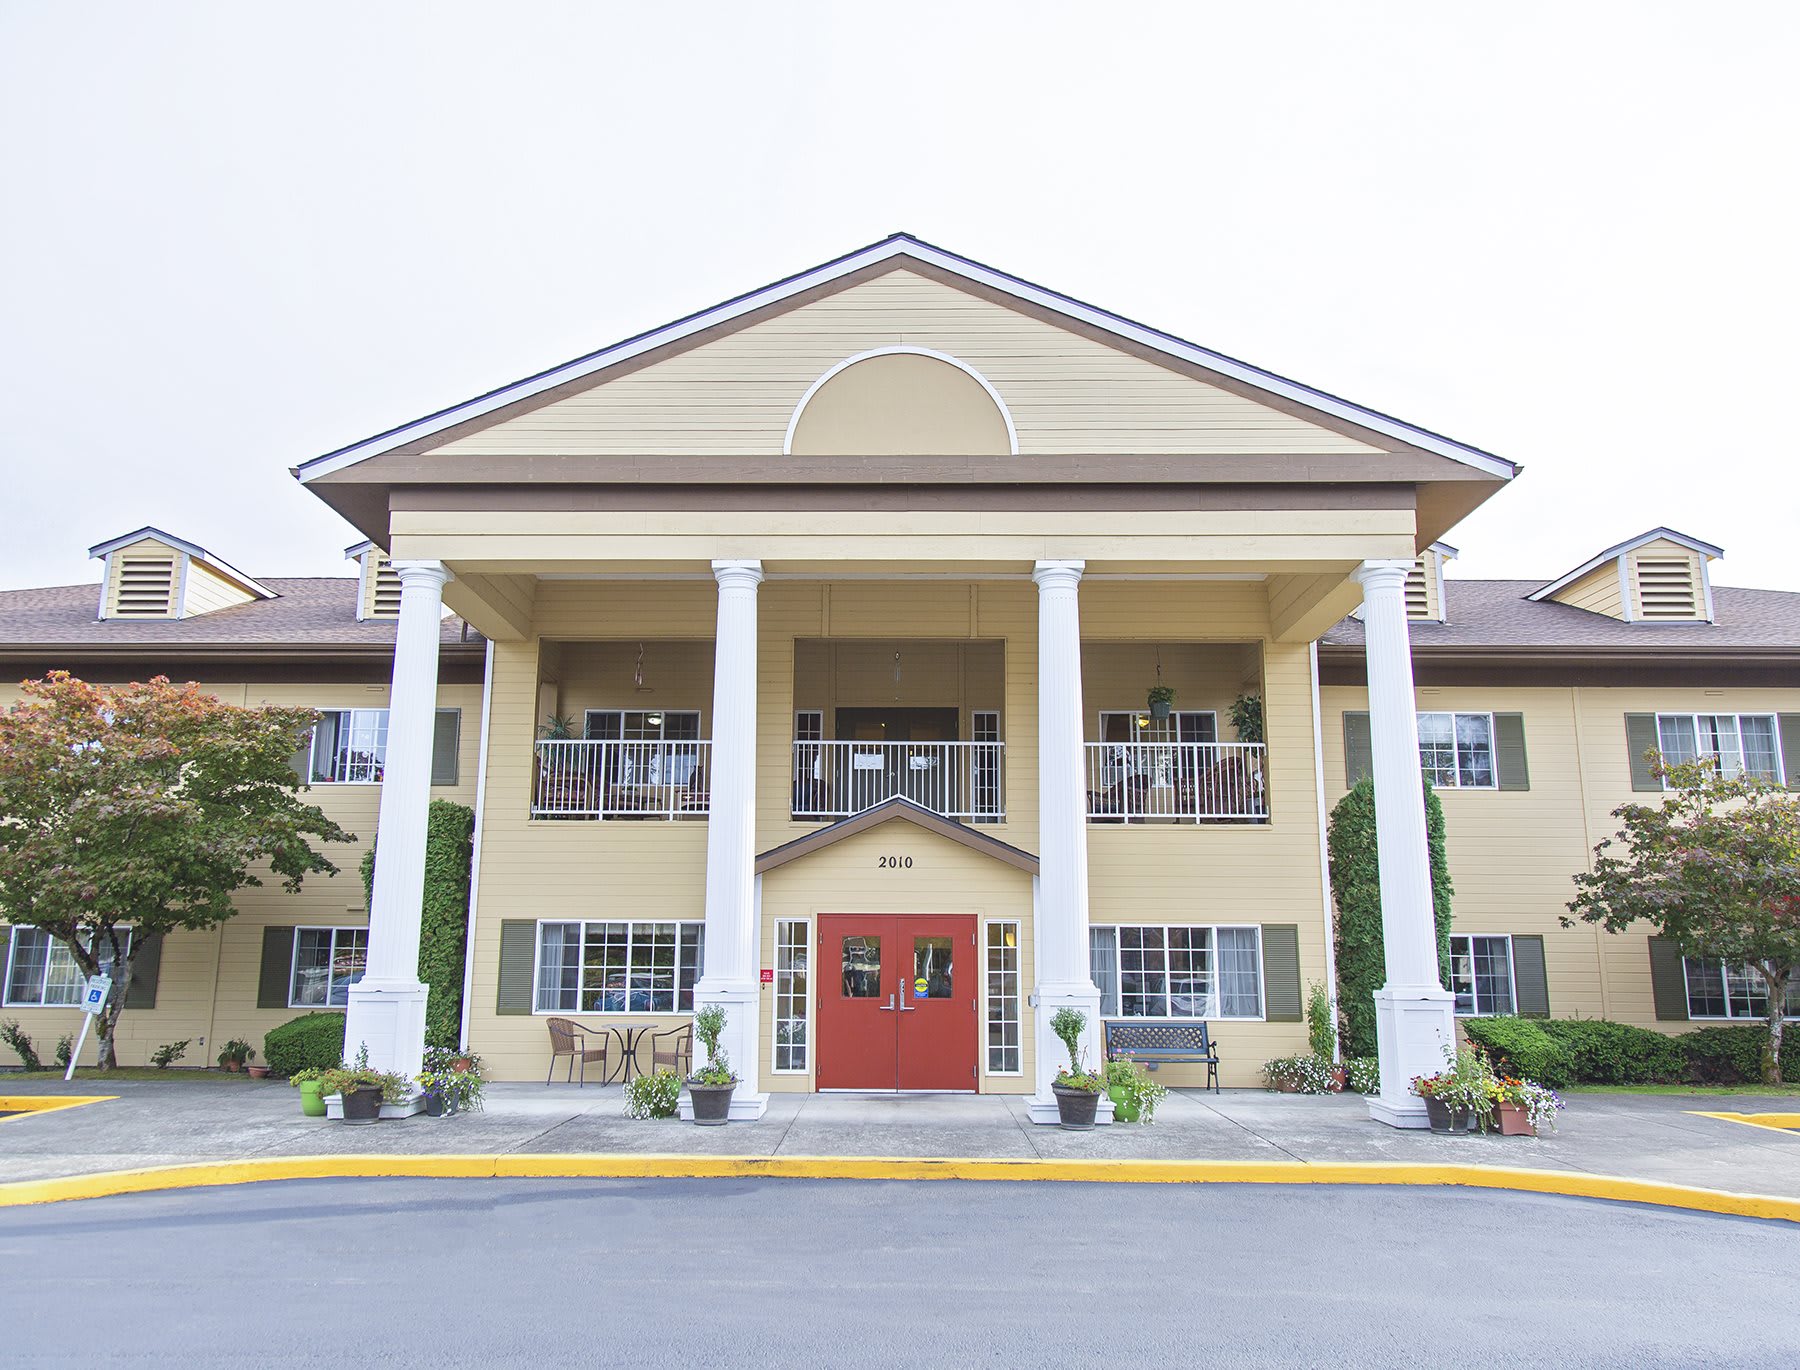 Centralia Point Assisted Living and Memory Care community exterior